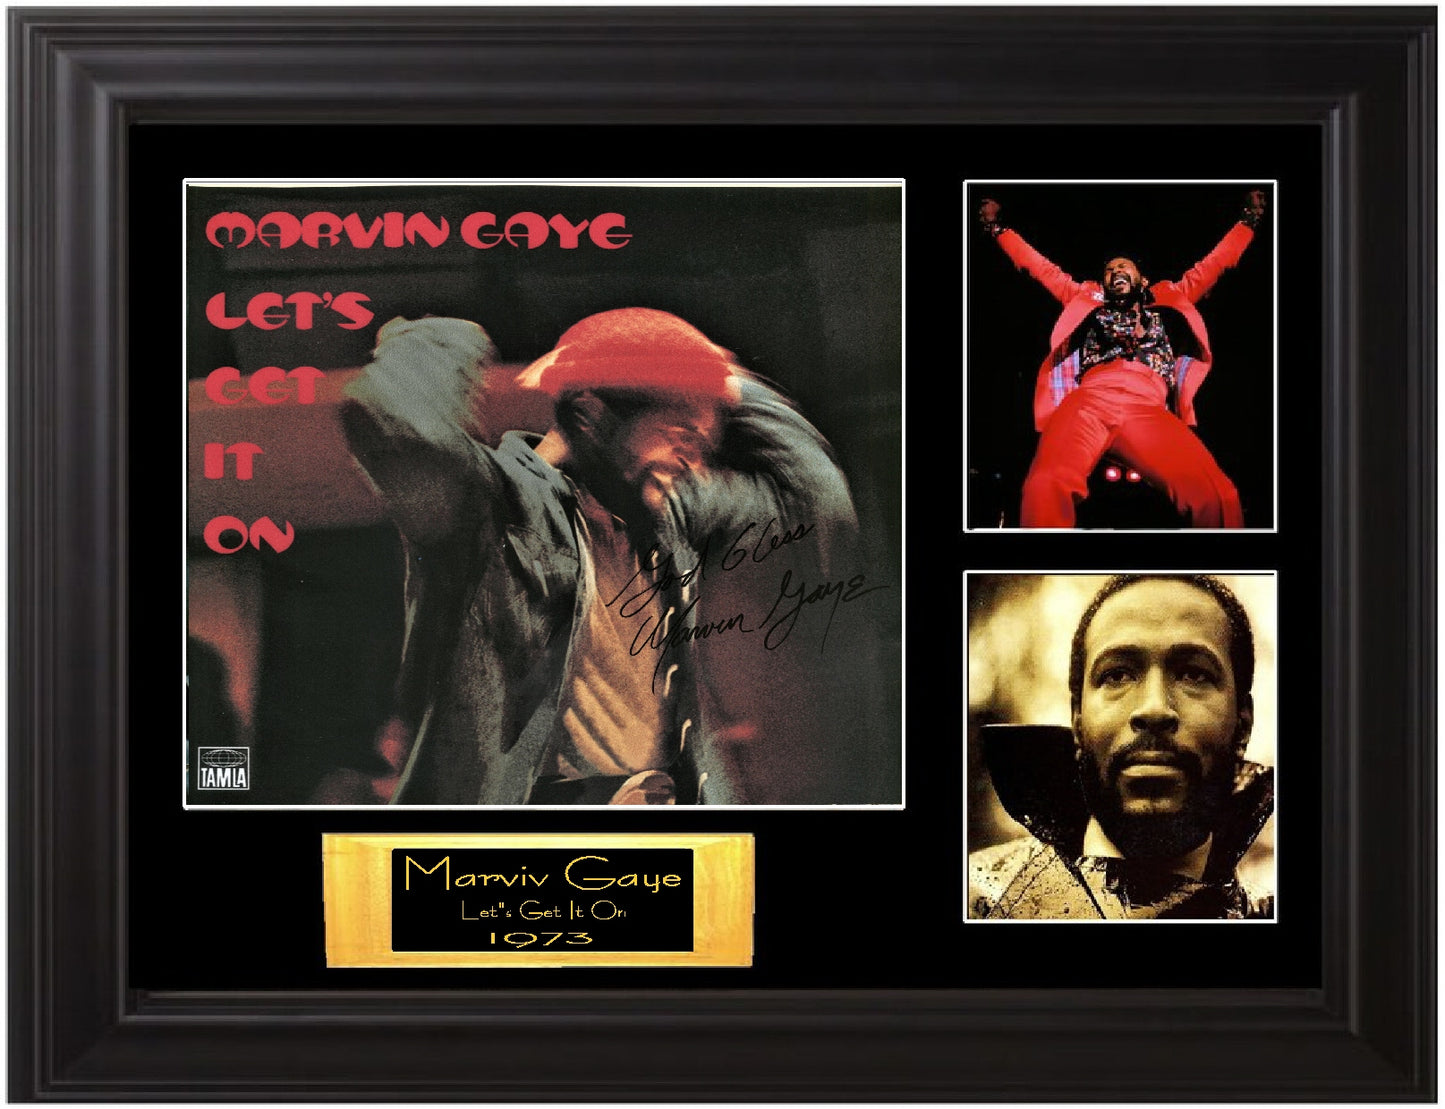 Marvin Gaye Autographed LP - Zion Graphic Collectibles